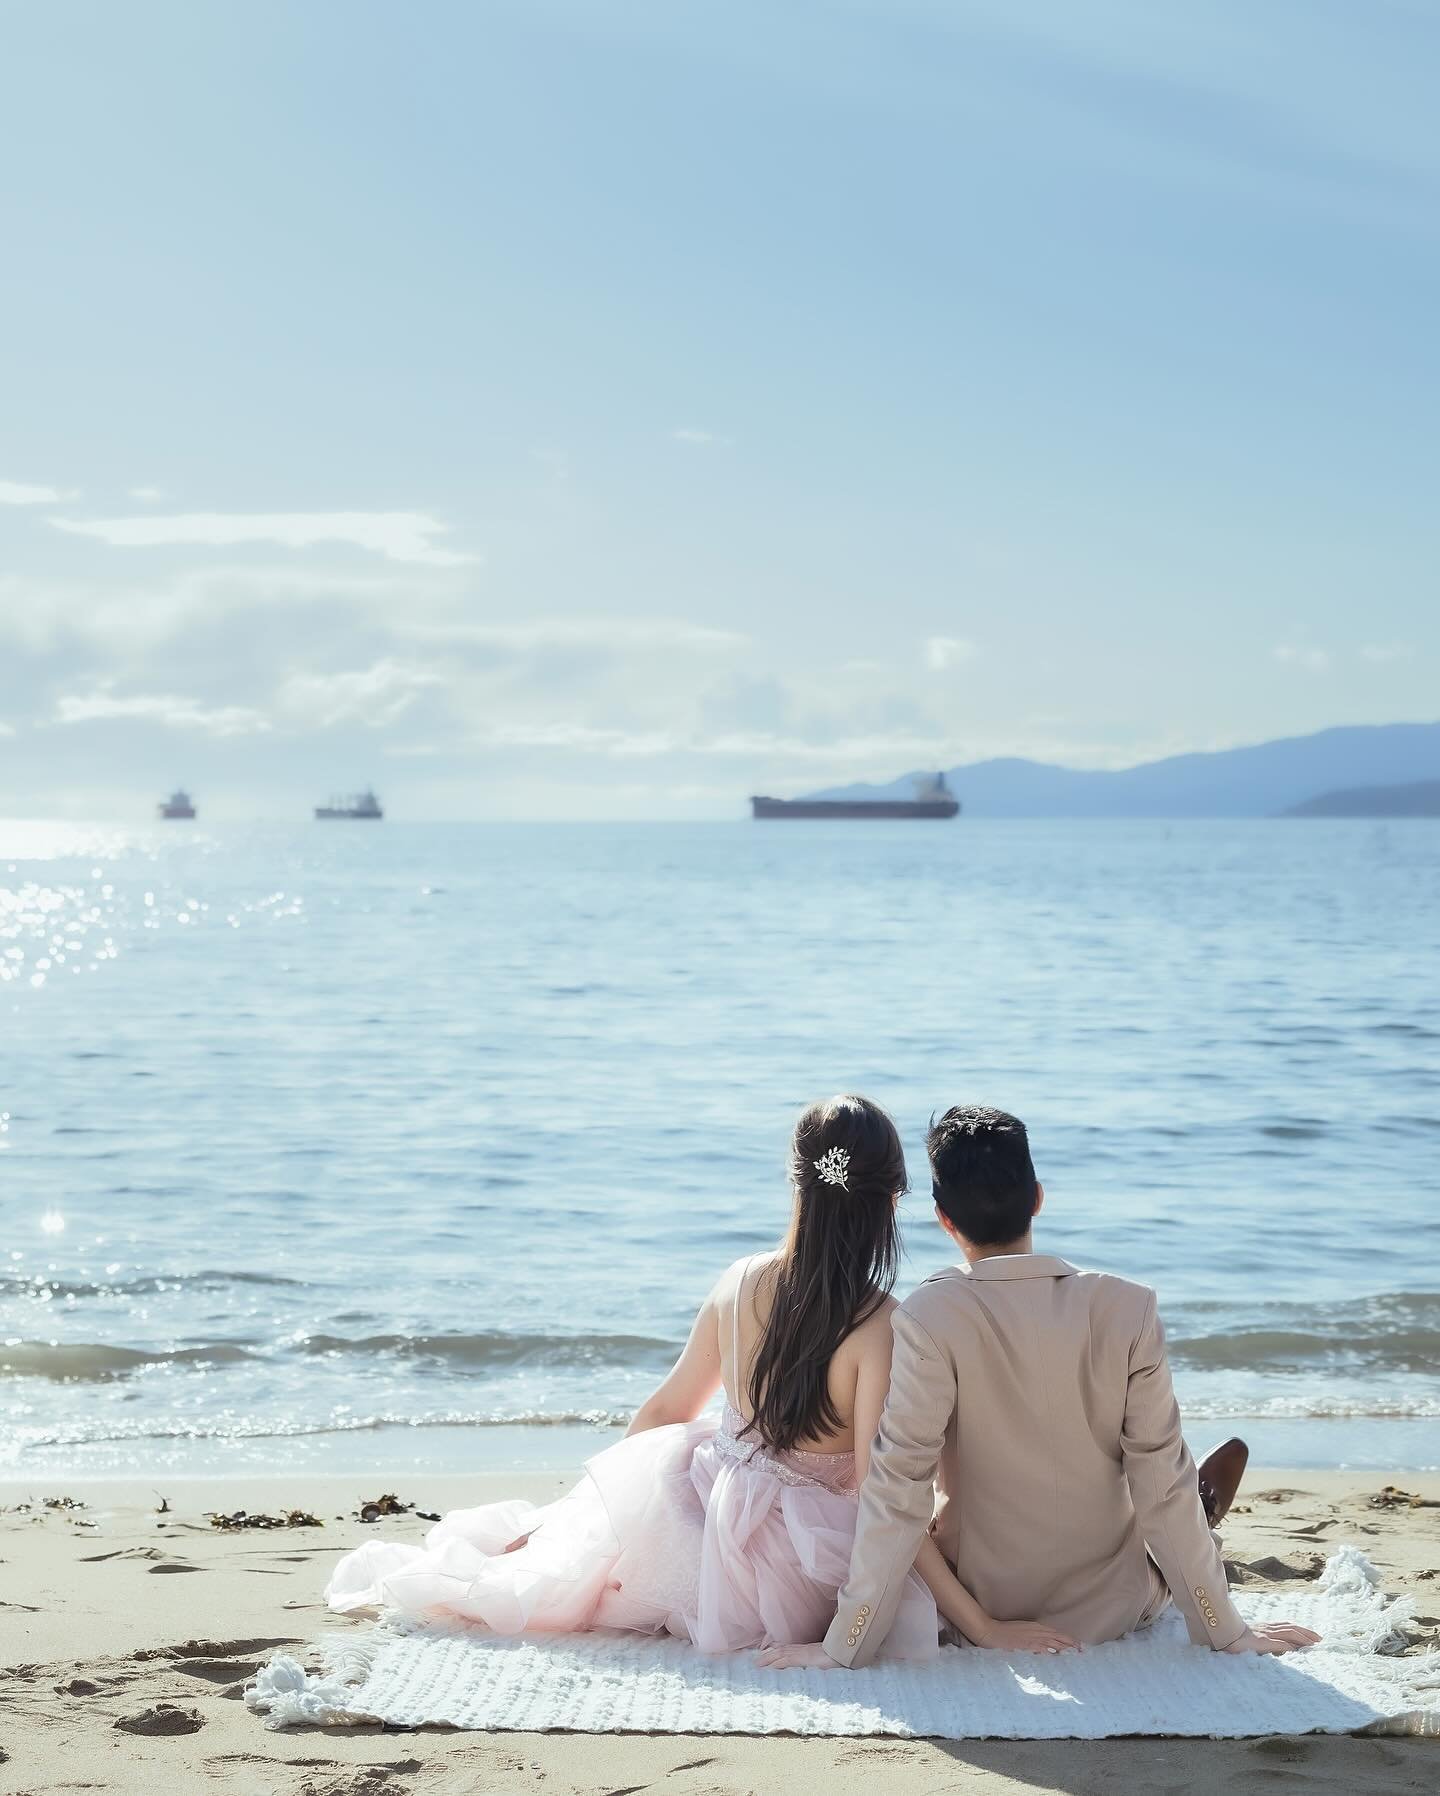 🌊☀️ Capturing Love by the Sea 📸 
Today&rsquo;s post features a sweet and romantic moment captured at the sunny shores of Vancouver. The clear blue skies and the natural charm of the couple make this photo truly special. 💕 For those seeking a natur